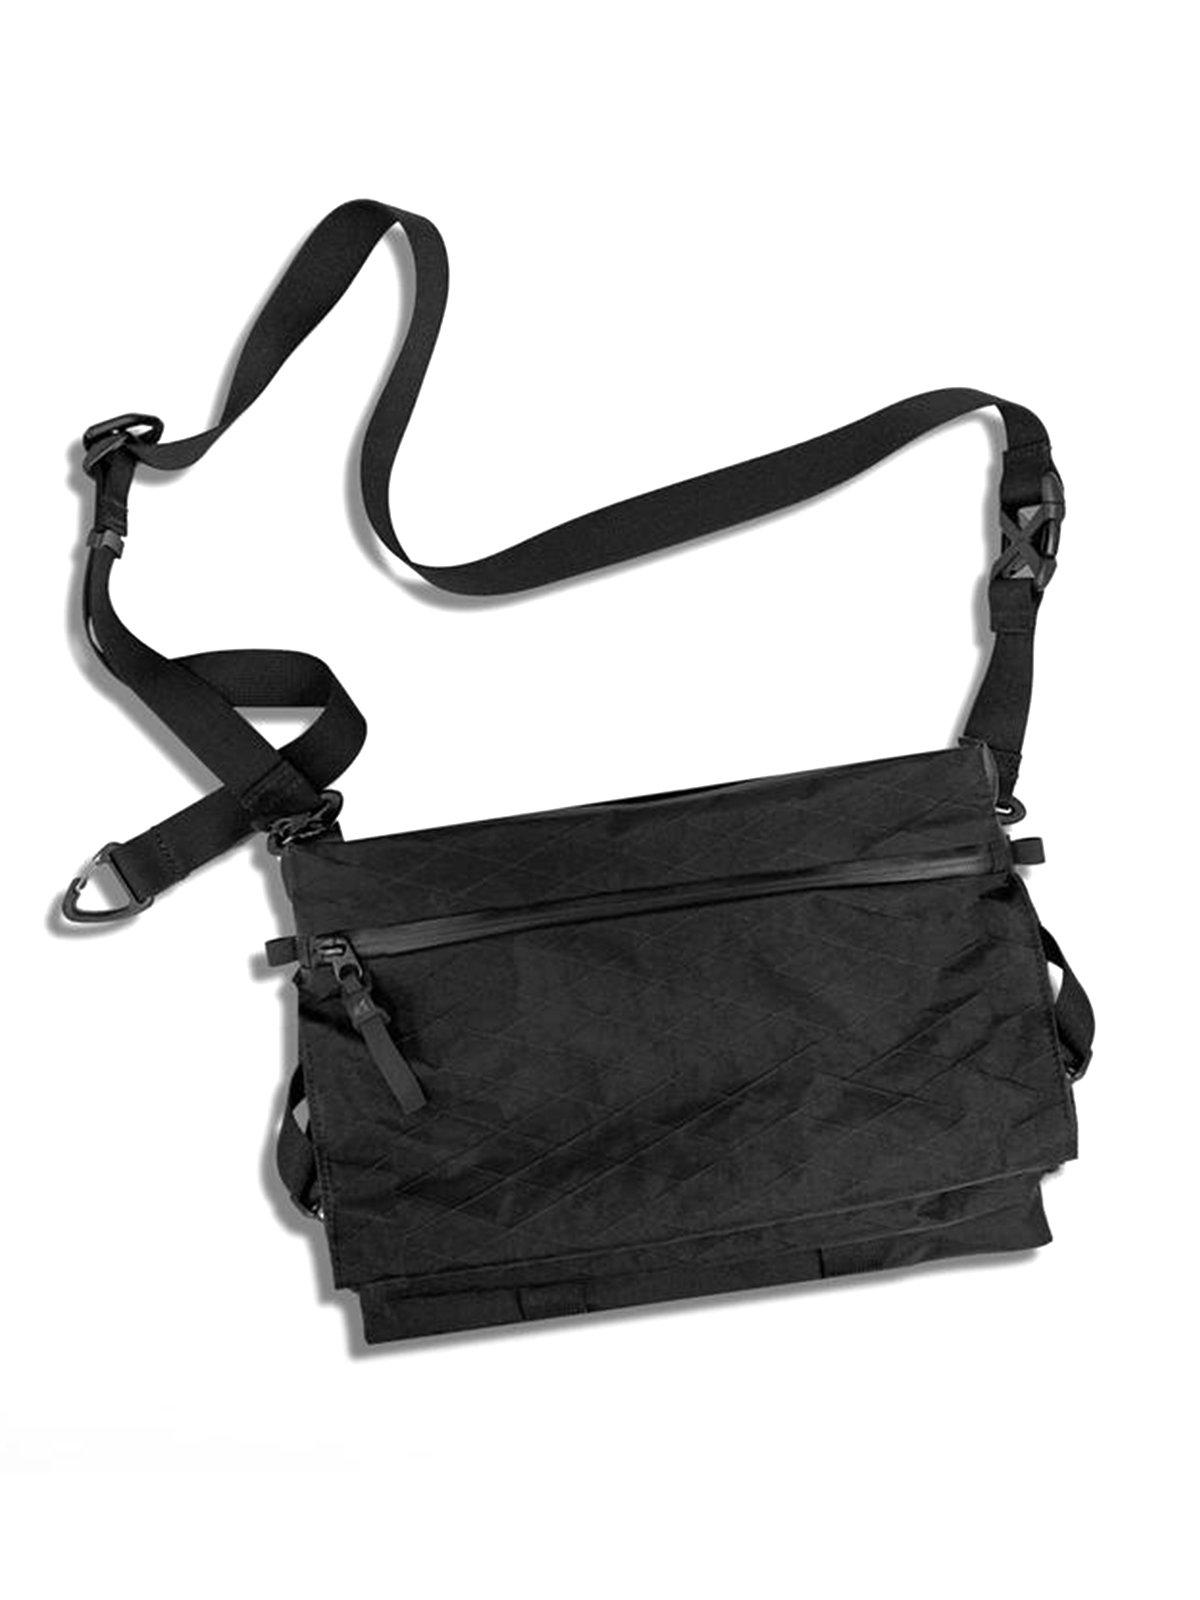 Code Of Bell ANNEX Liner Sacoche Sling Bag Pitch Black - MORE by Morello Indonesia